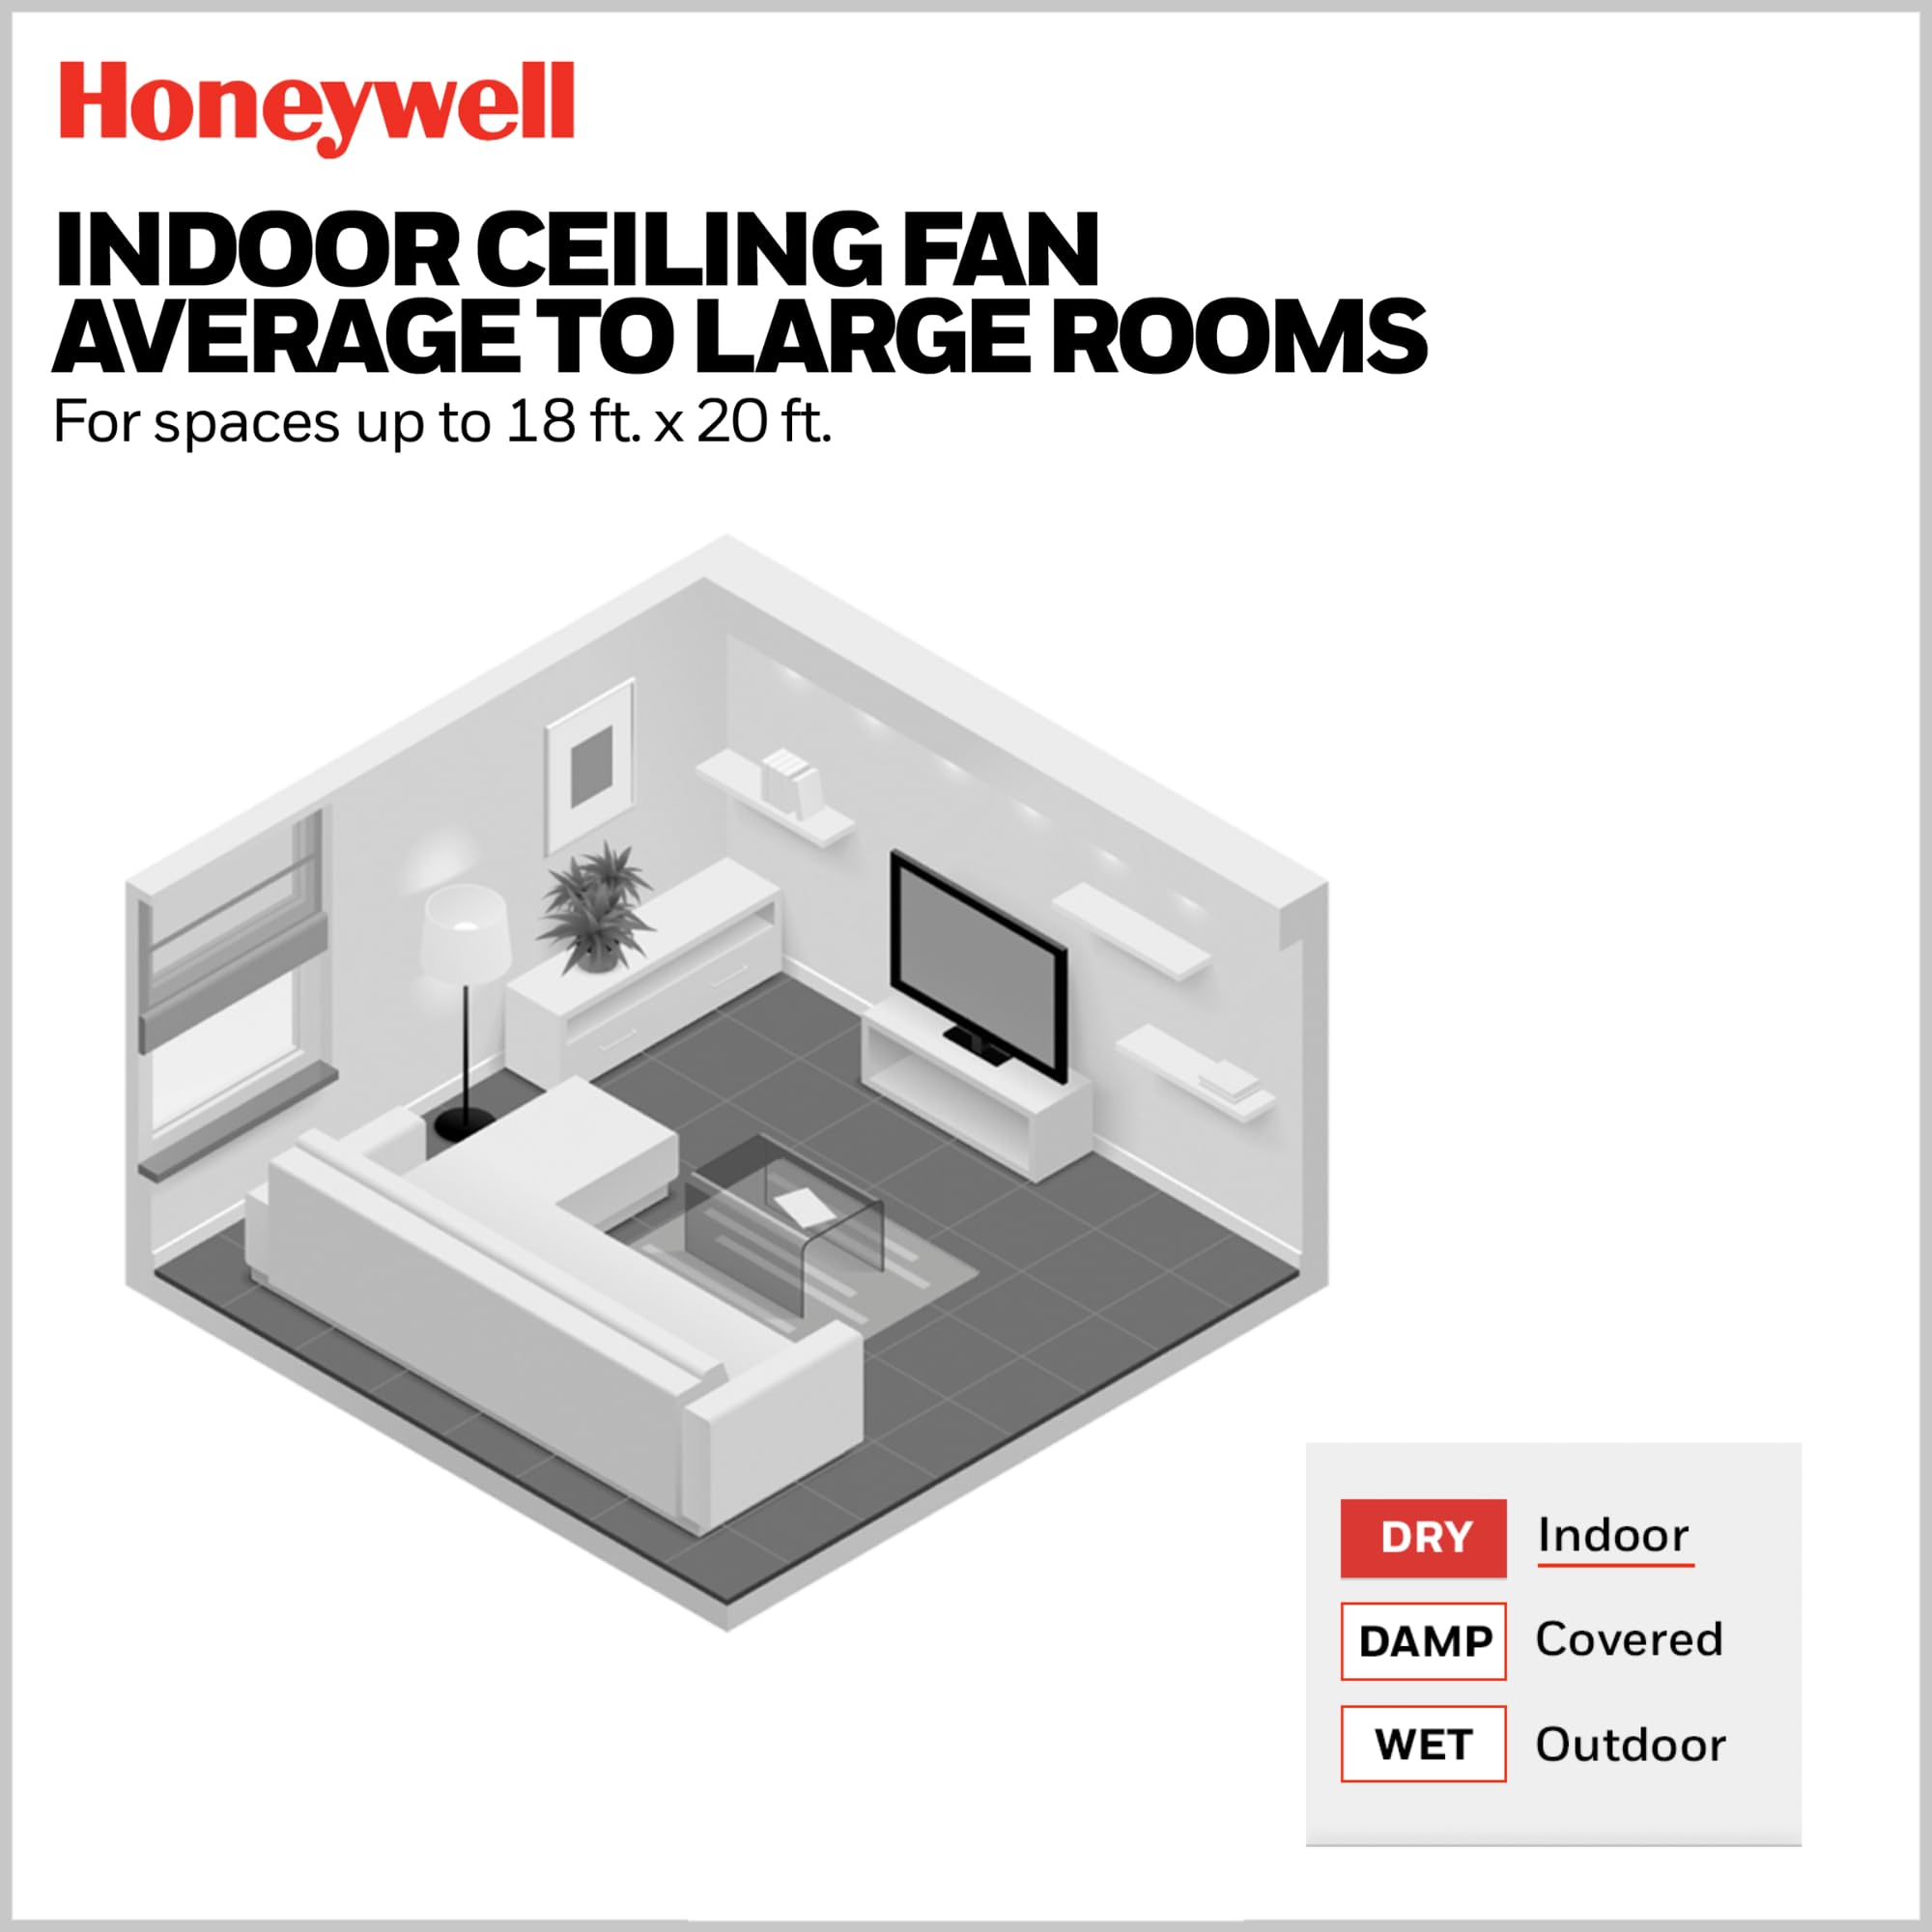 Honeywell Ceiling Fans Graceshire, 52 Inch Contemporary Ceiling Fan with Color Changing LED Light, Remote Control, Flush Mount, 5 Dual Finish Blades, Reversible Airflow - 51859-01 (Matte Black)